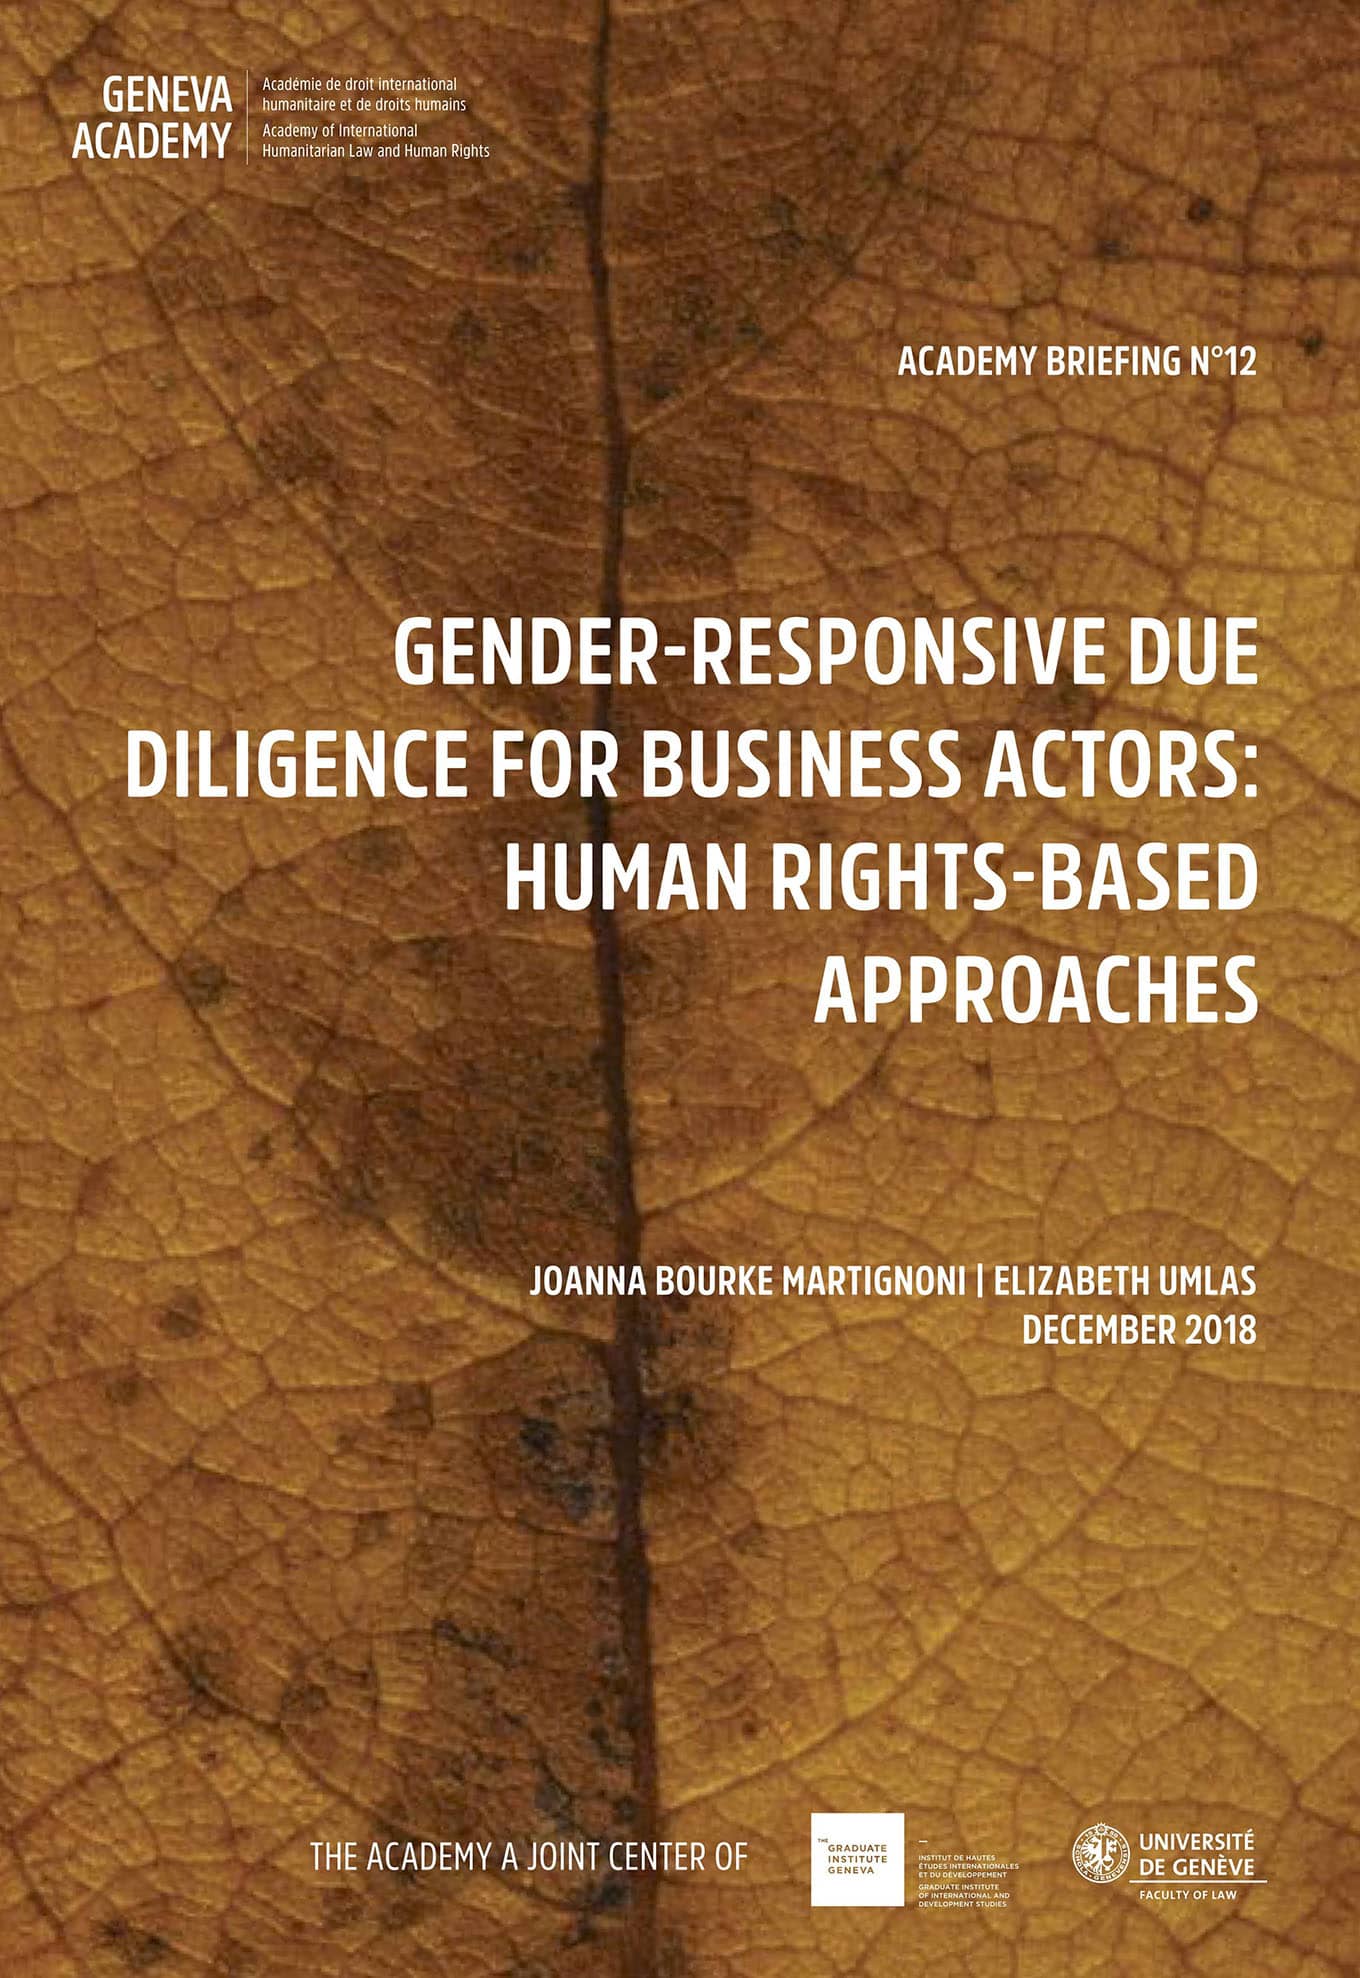 Gender-responsive Due Diligence for Business Actors: Human Rights-Based Approaches (Geneva Academy, 2018)